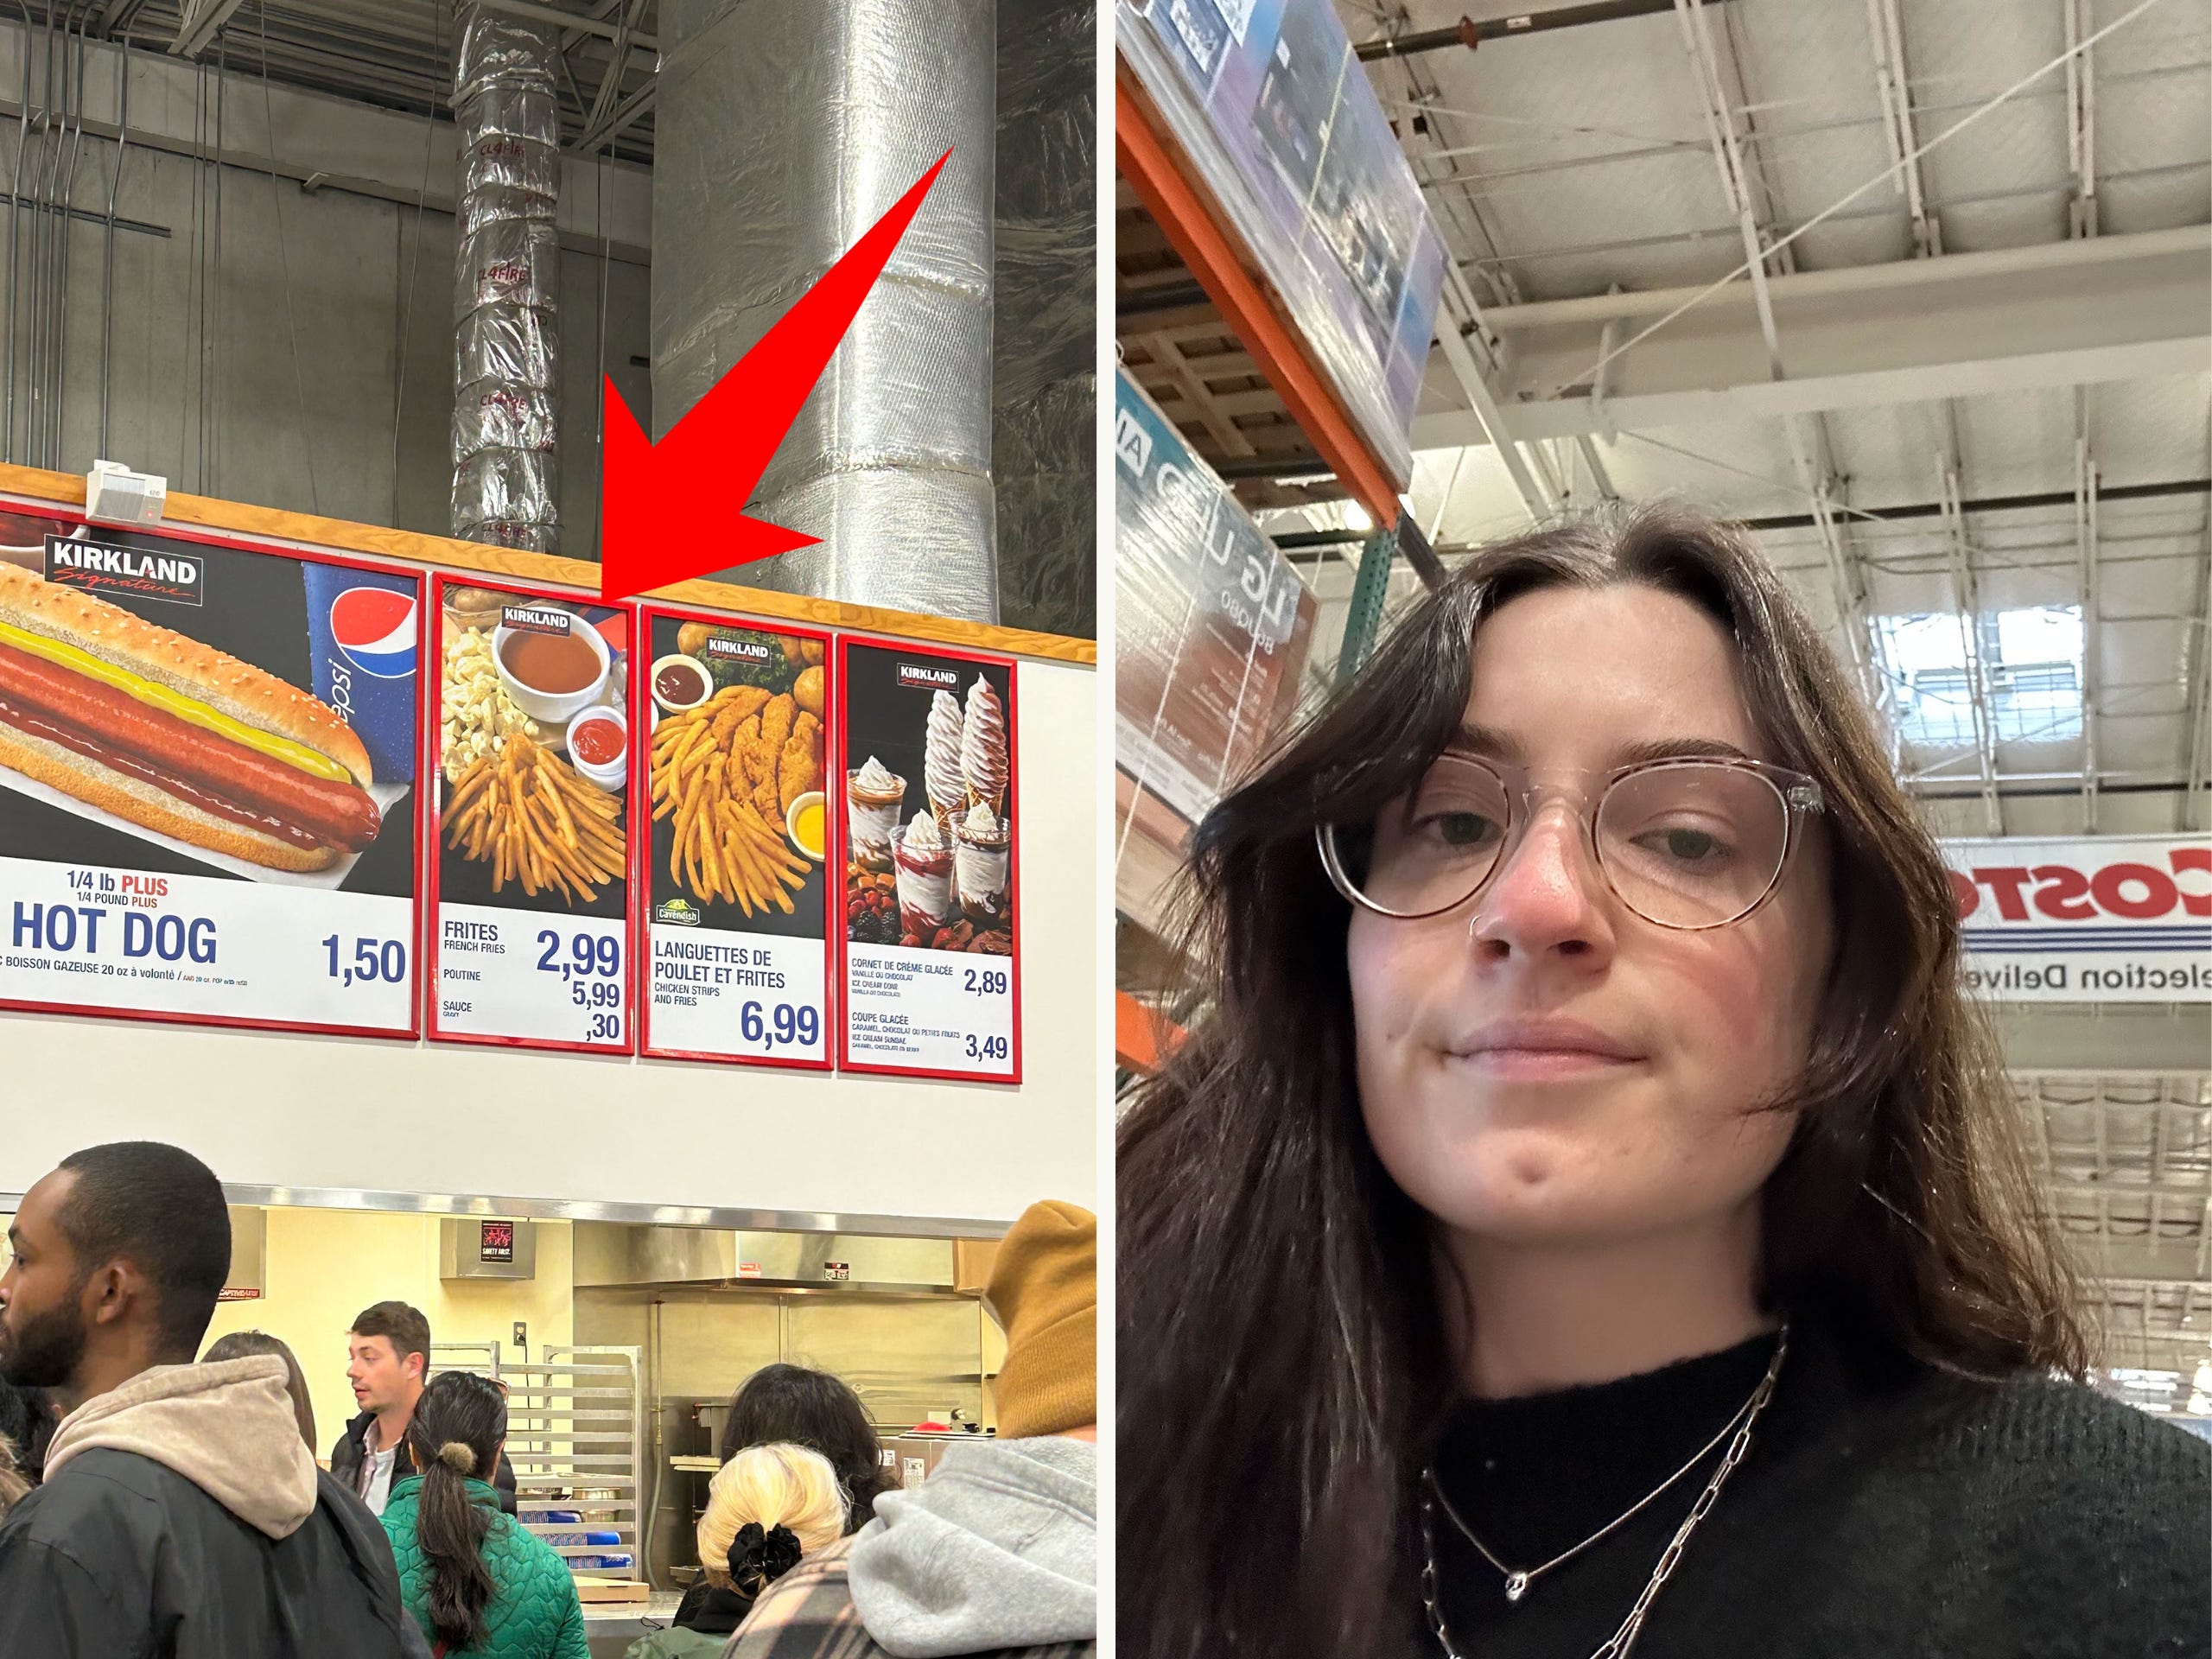 I tried Costco's famous poutine in Canada. The food was fine, but it